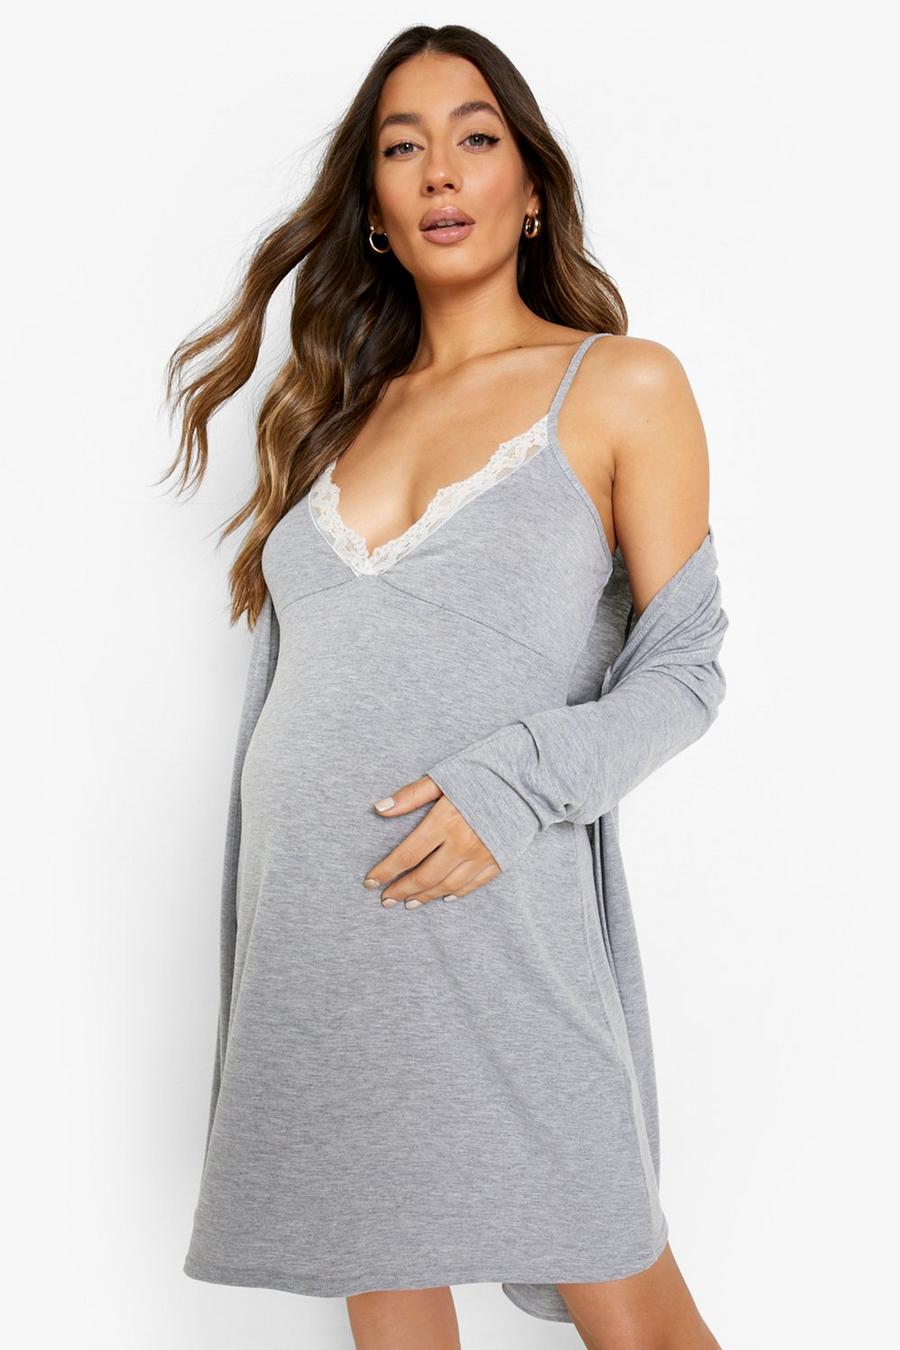 Grey marl Maternity Lace Trim Nightgown And Robe